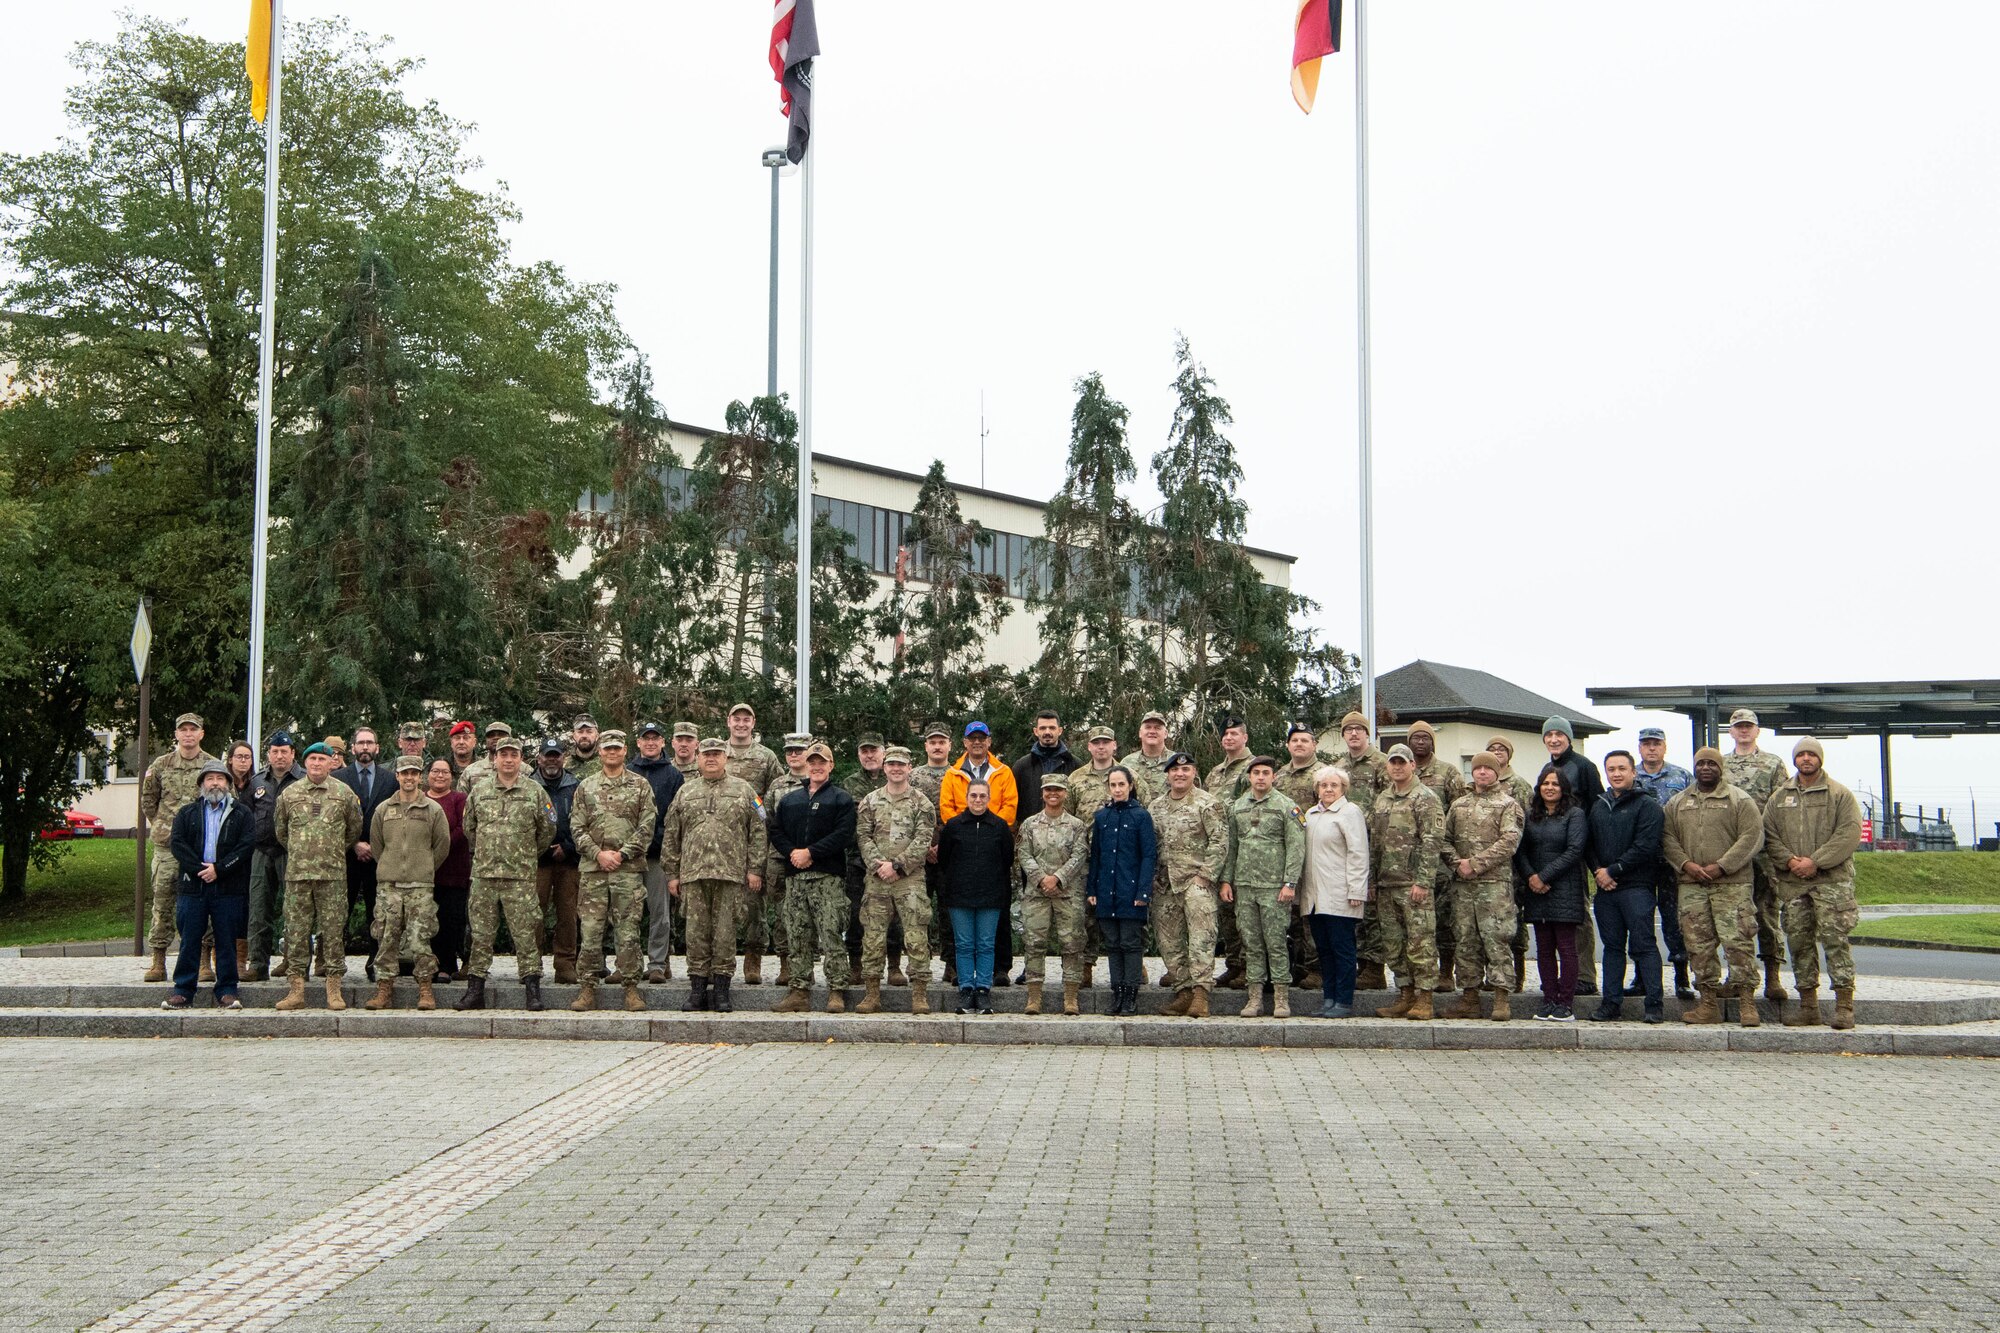 U.S. service members, Romanian service members and civilians pose for a photo in front of flag poles.